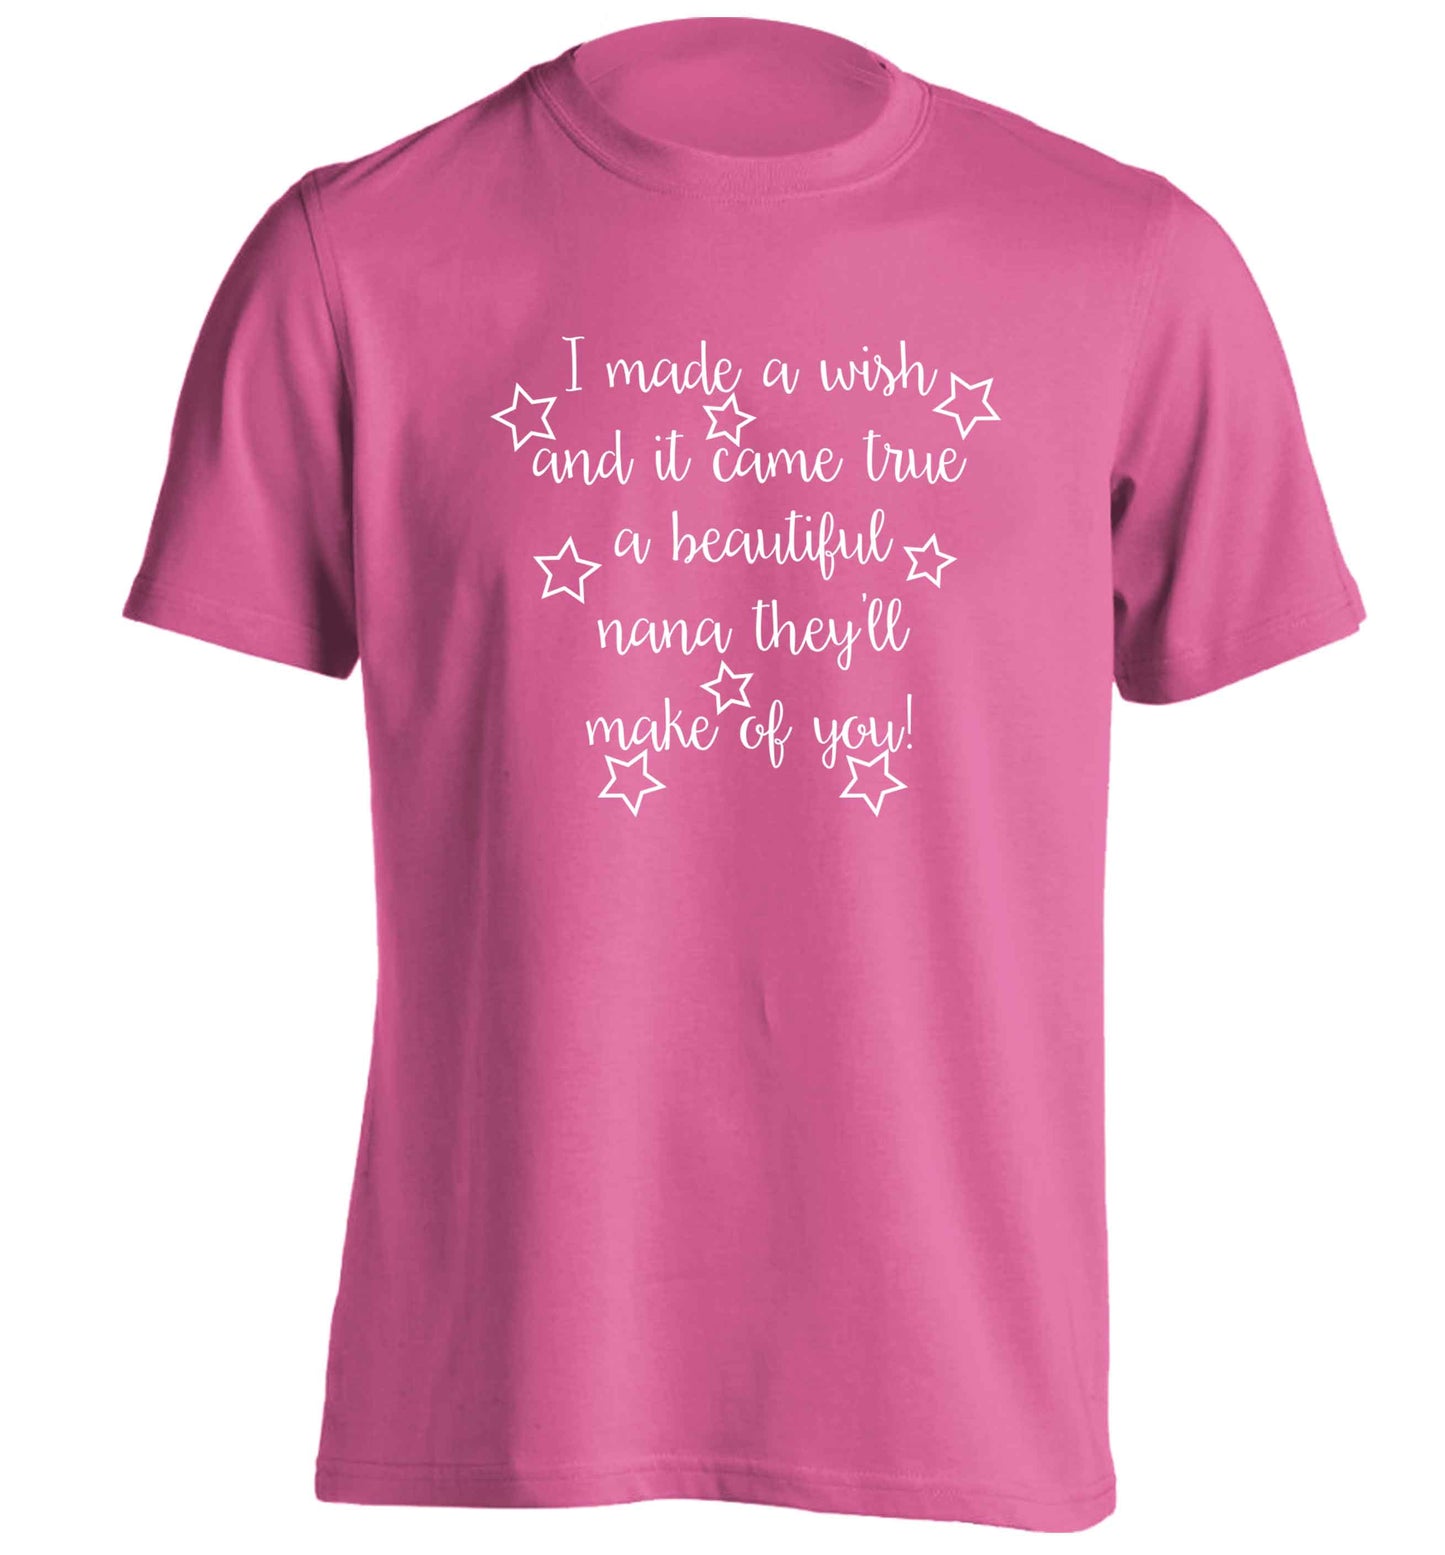 I made a wish and it came true a beautiful nana they'll make of you! adults unisex pink Tshirt 2XL